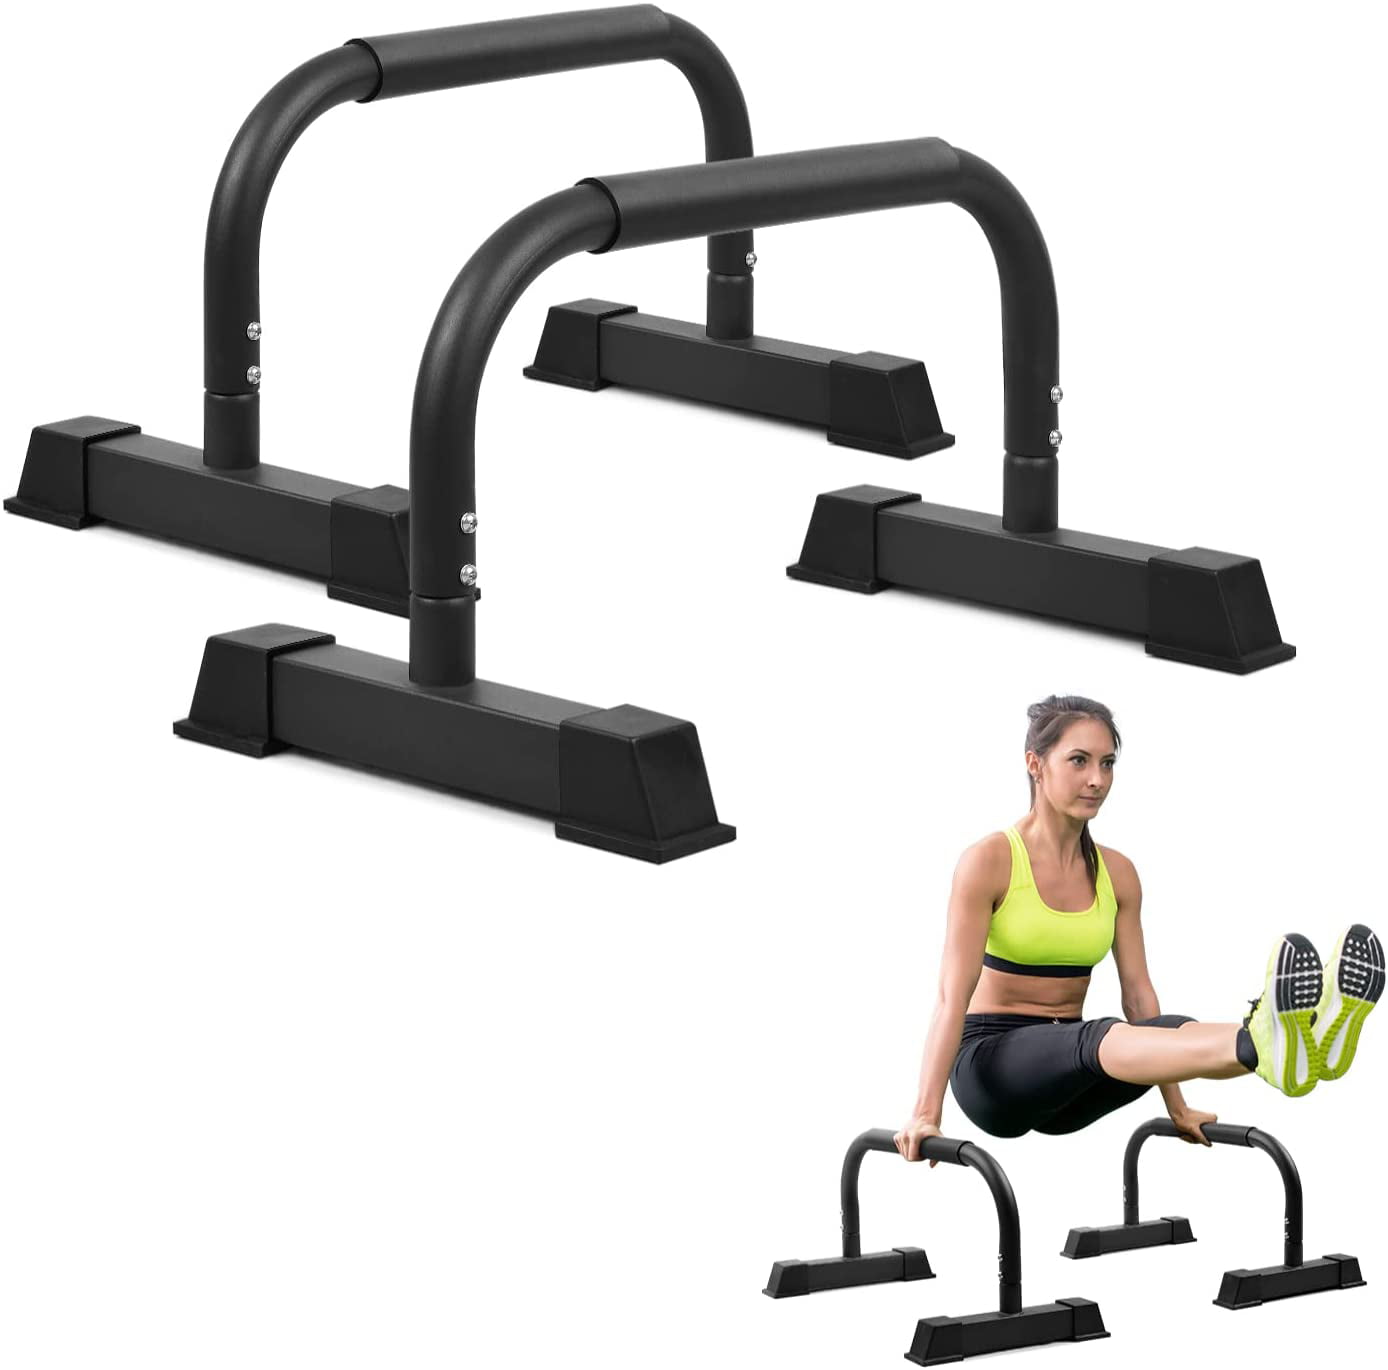 Details about   9 in 1 Push Up Bars Handles Pushup Stands Foam Grip Home Gyms Fitness Exercise 